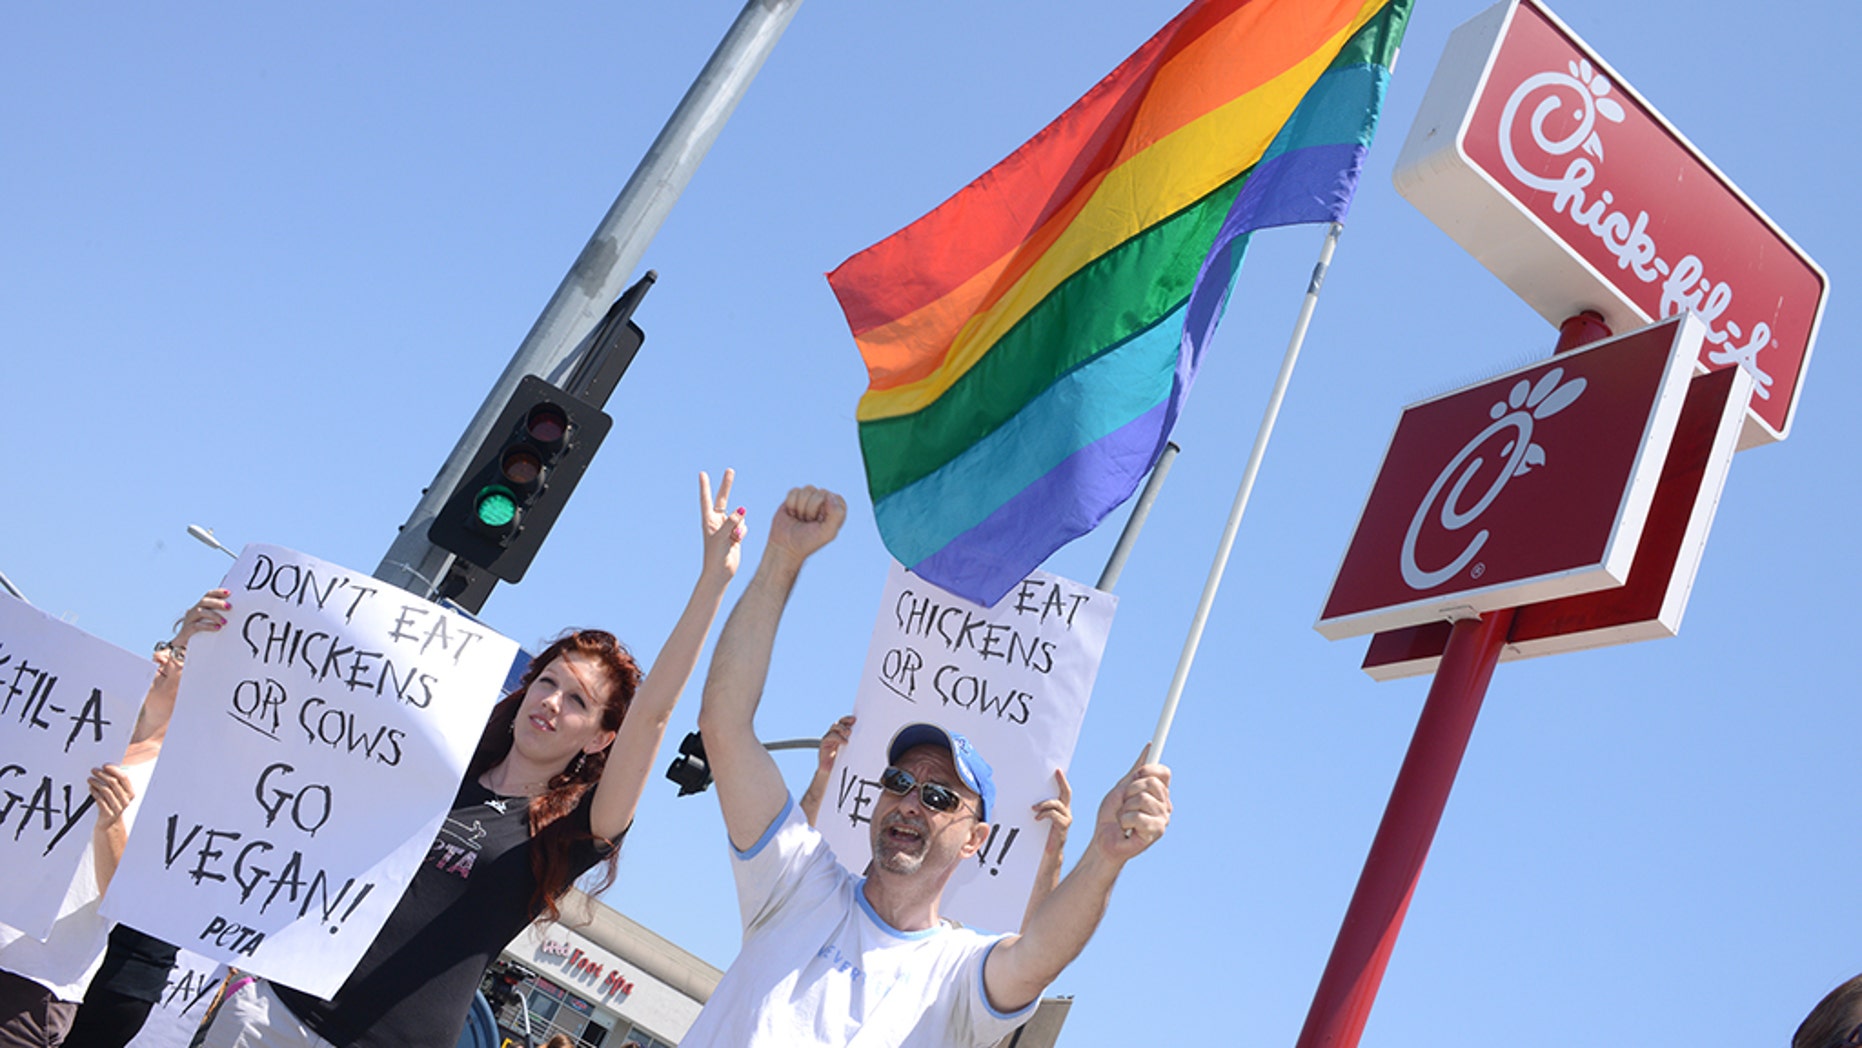 Chick Fil As Canadian Expansion Sparks Pro Lgbtq Protests Fox News